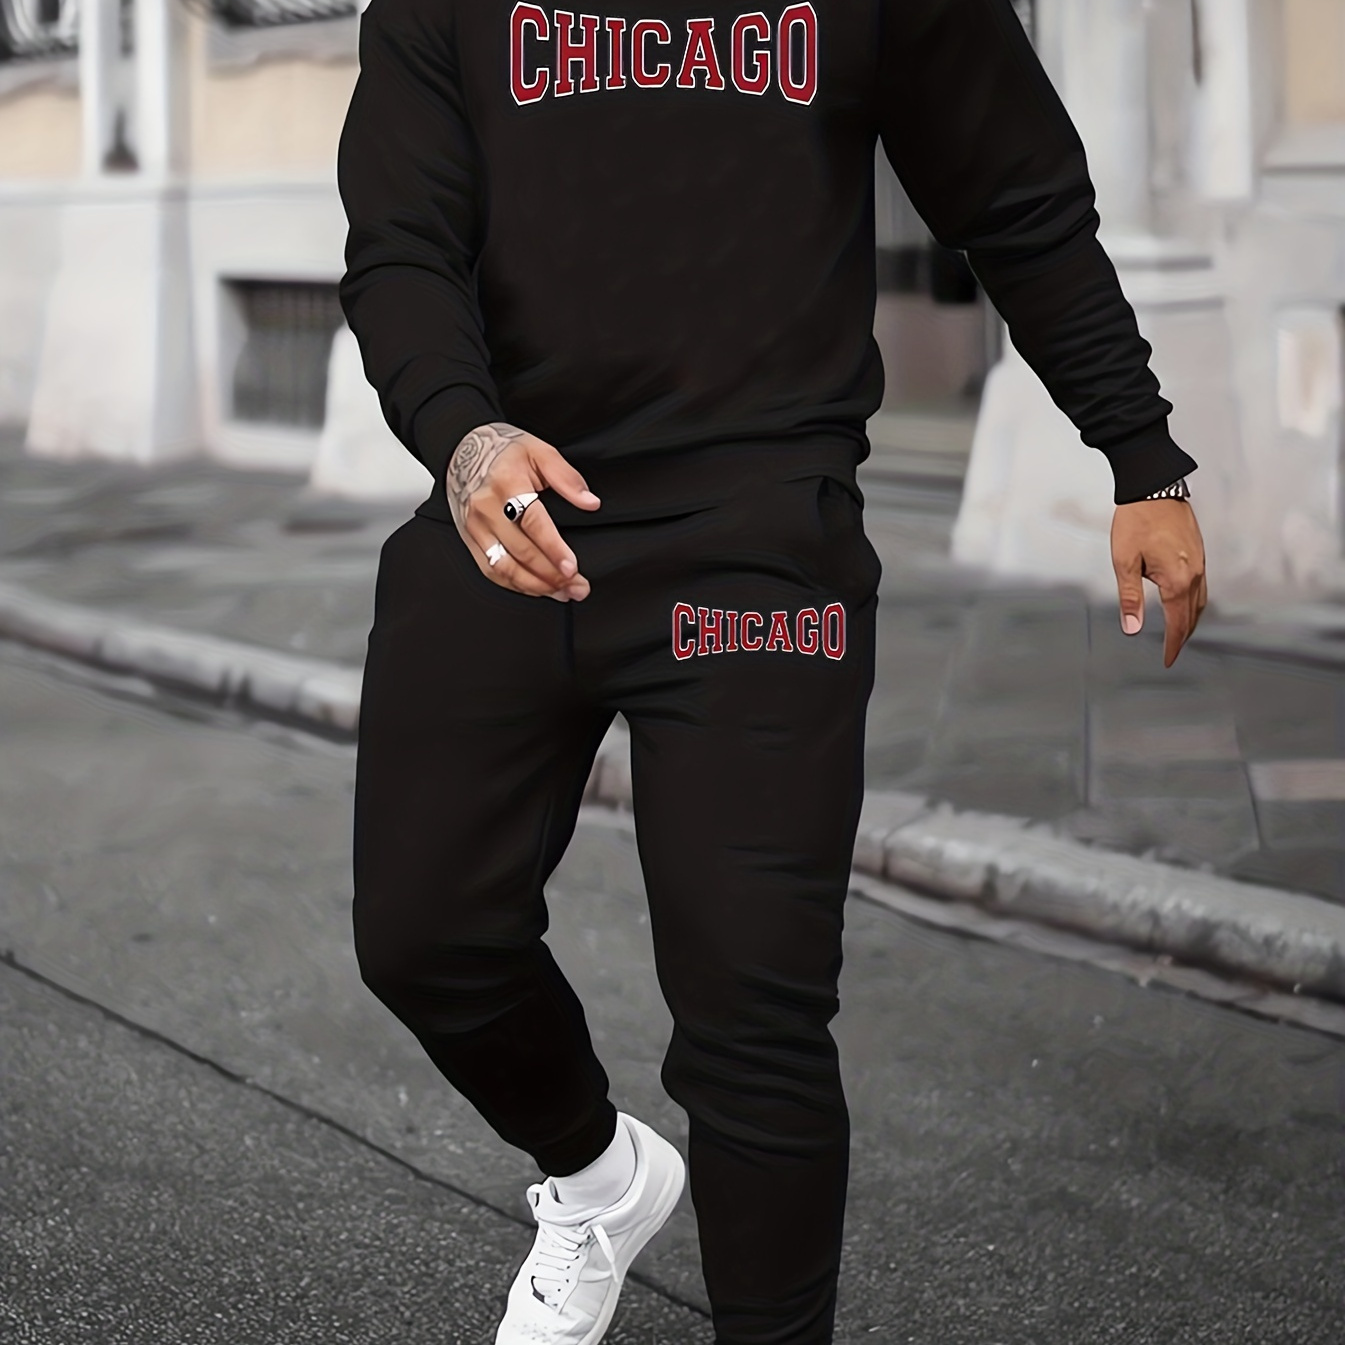 

Chicago Pattern Print Men's Long Sleeve Round Neck Street Casual Sports And Fashionable Sweatshirt, Elastic Drawstring Trousers, Sweatshirt And Pants Two-piece Set, For Outdoor, For Autumn And Winter